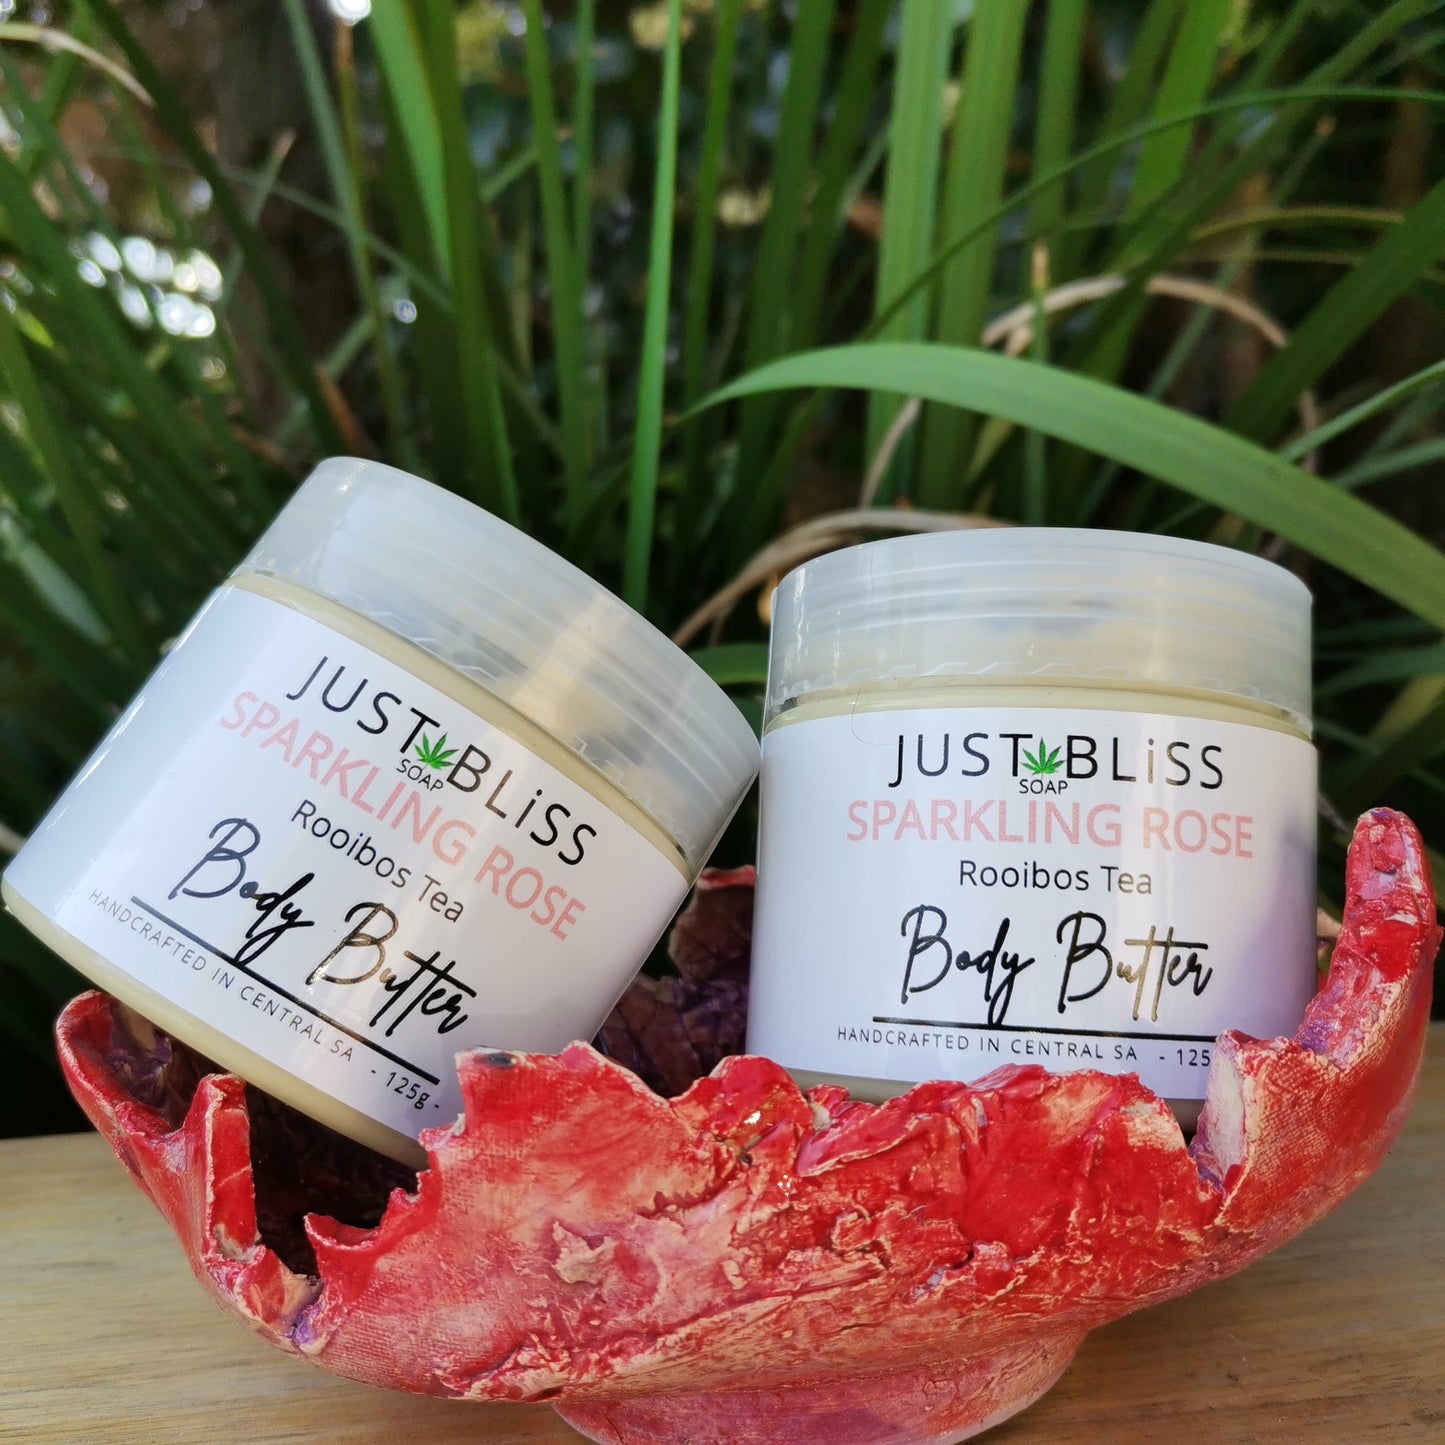 JUSTBLISS: Rooibos Tea BODY BUTTER: sparkling rose